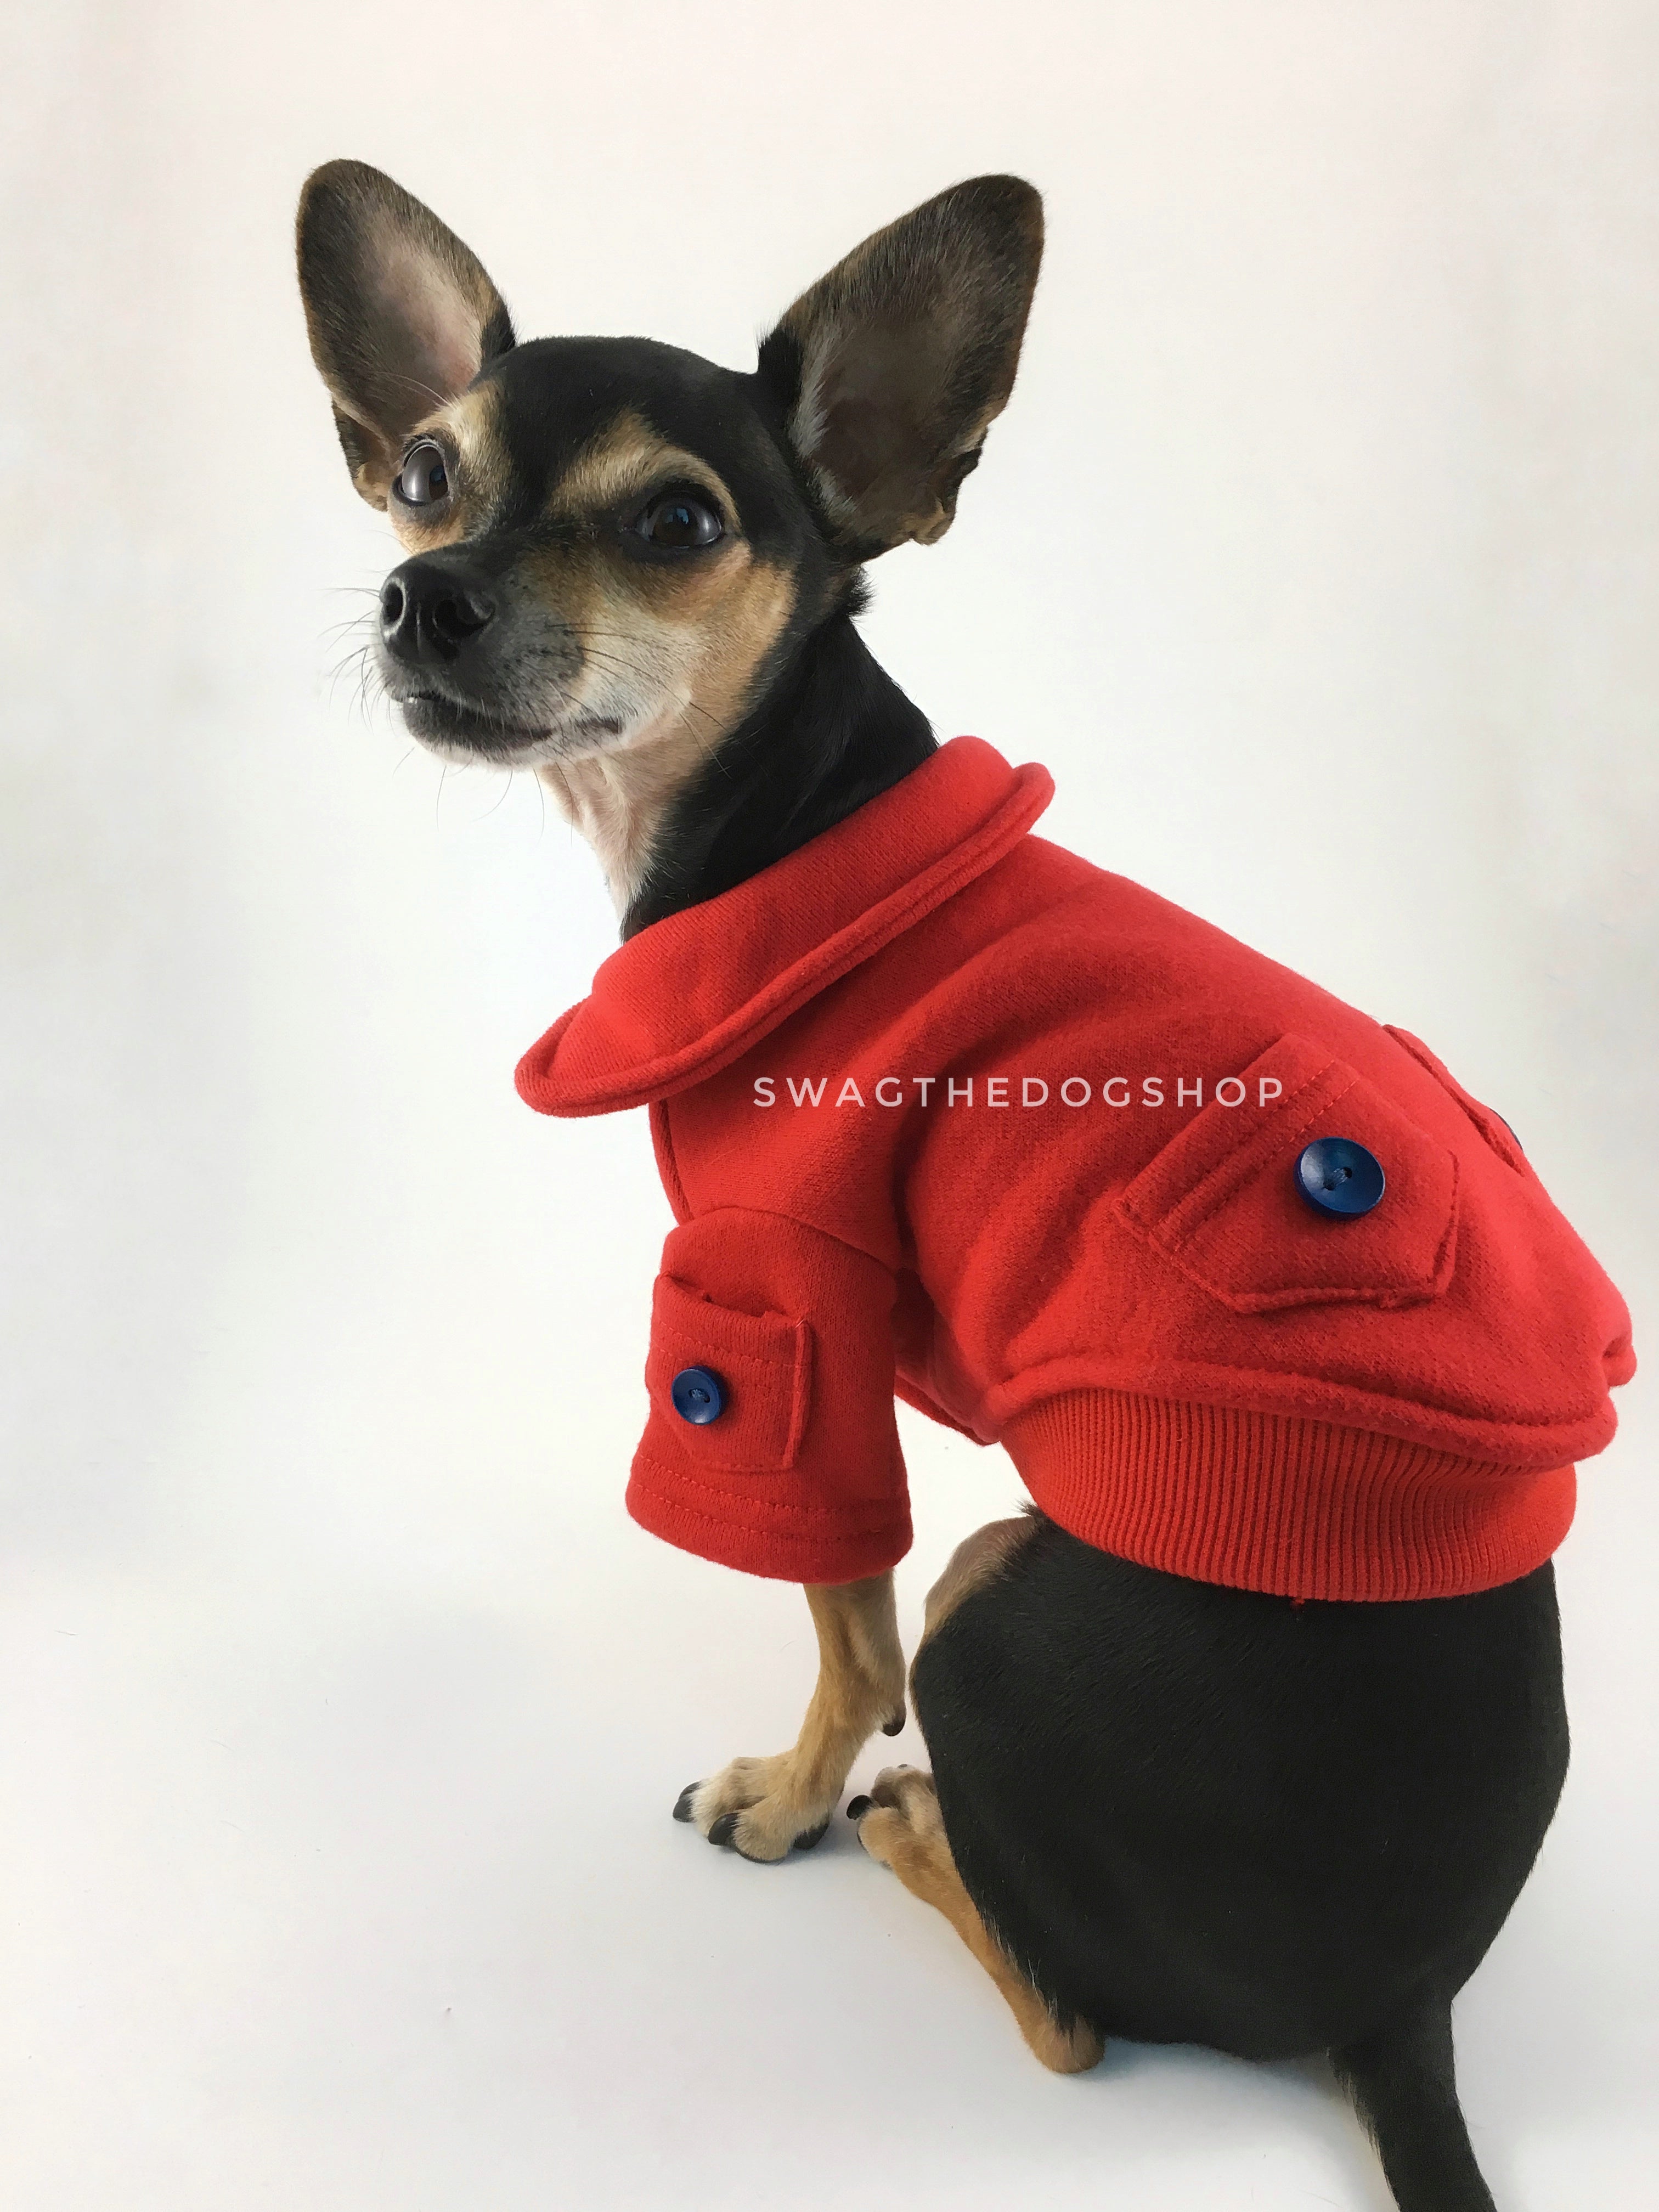 Yachtsman Red Shirt - Side and Back View of Cute Chihuahua Dog Wearing Shirt. Red Shirt with Fleece Inside